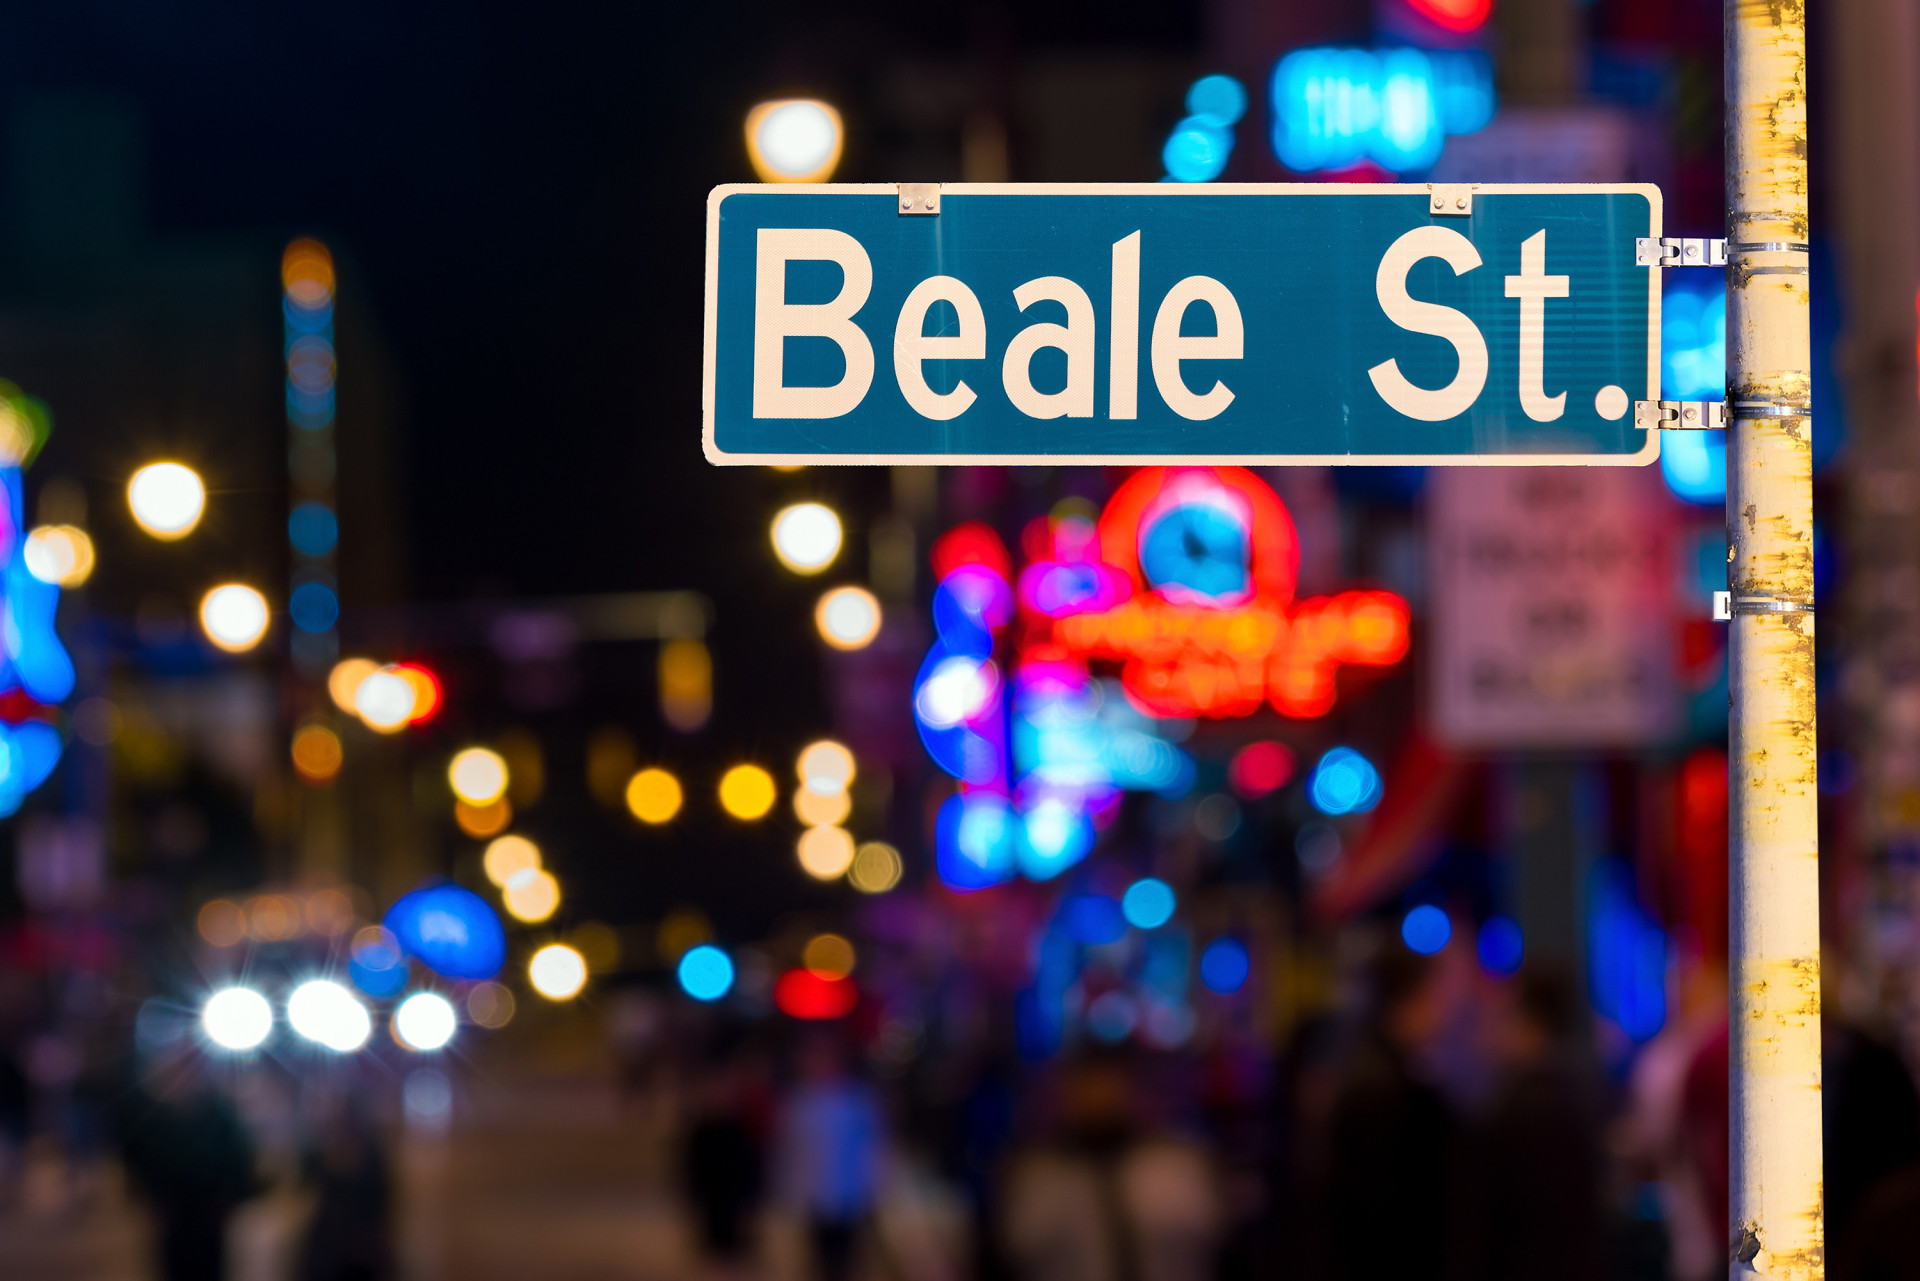 Head to Beale Street Historic District for a legendary night out on the town.